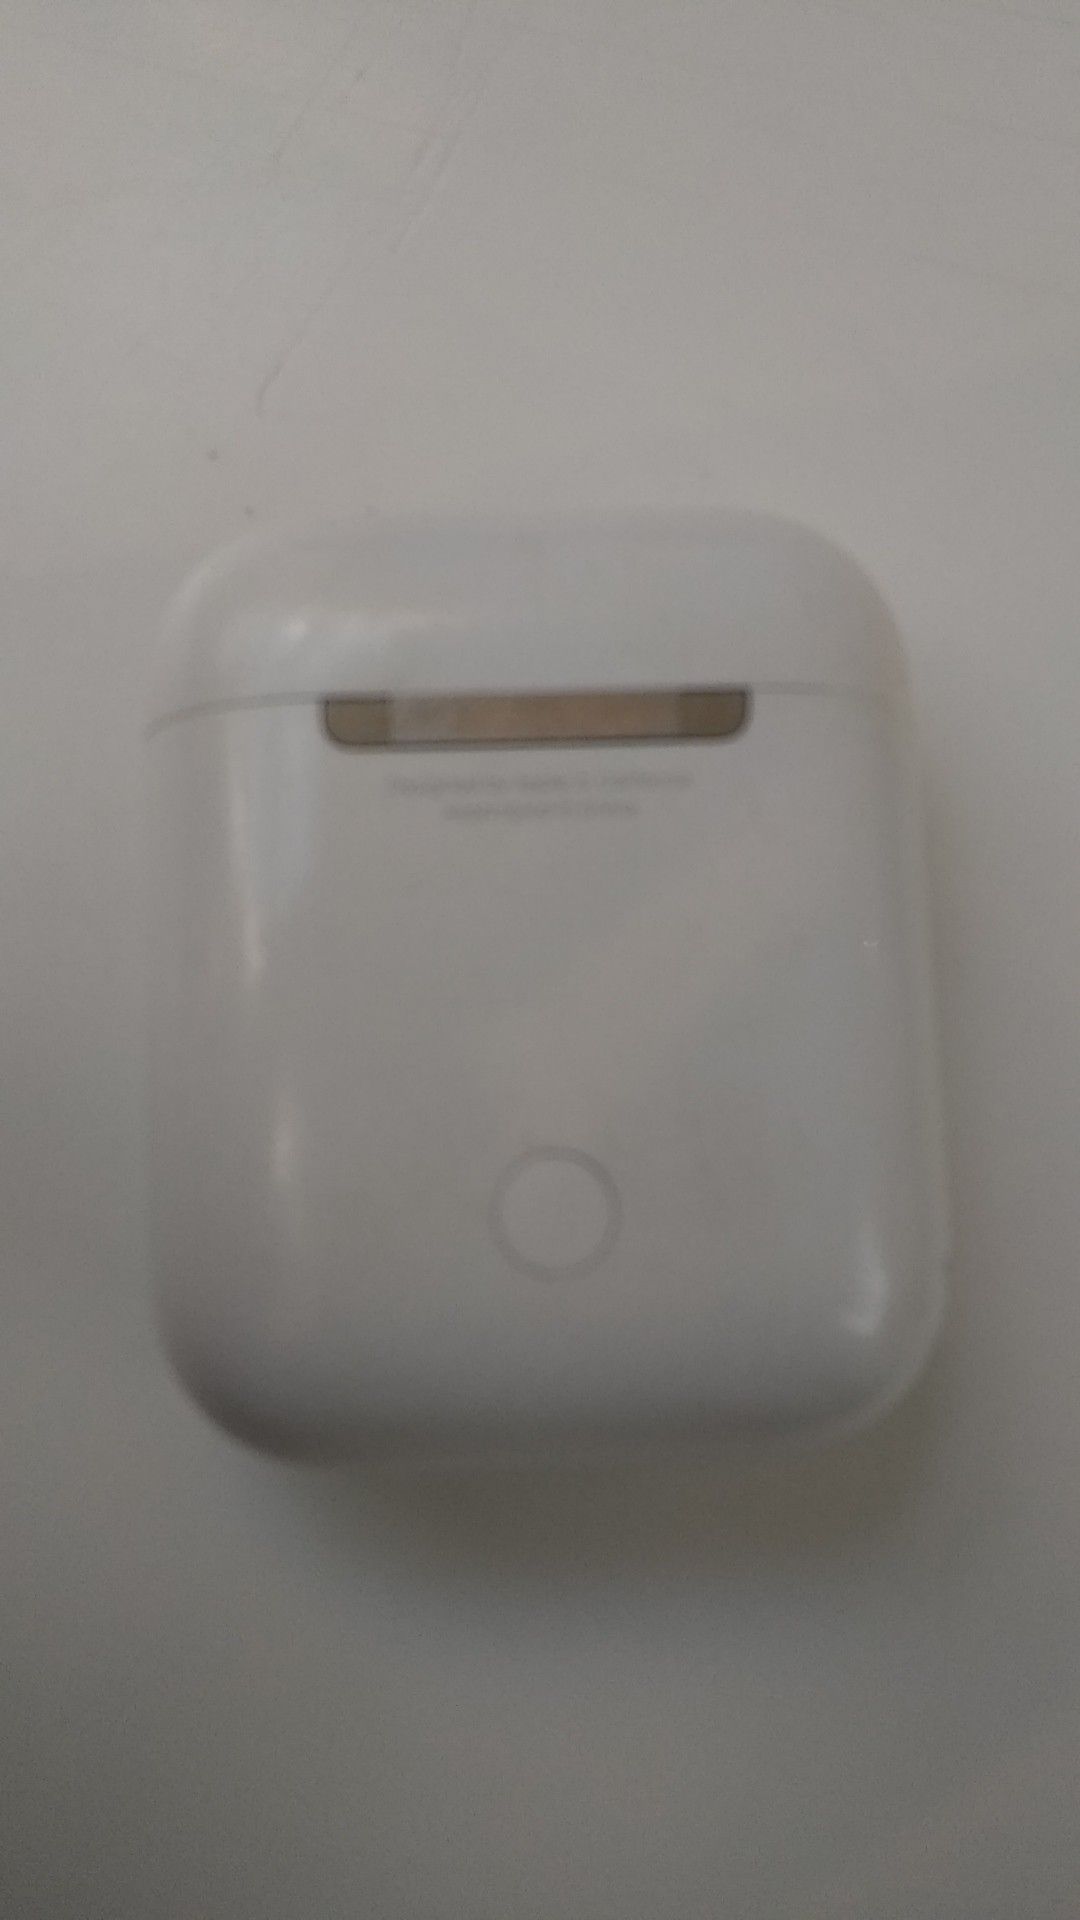 Real Airpods